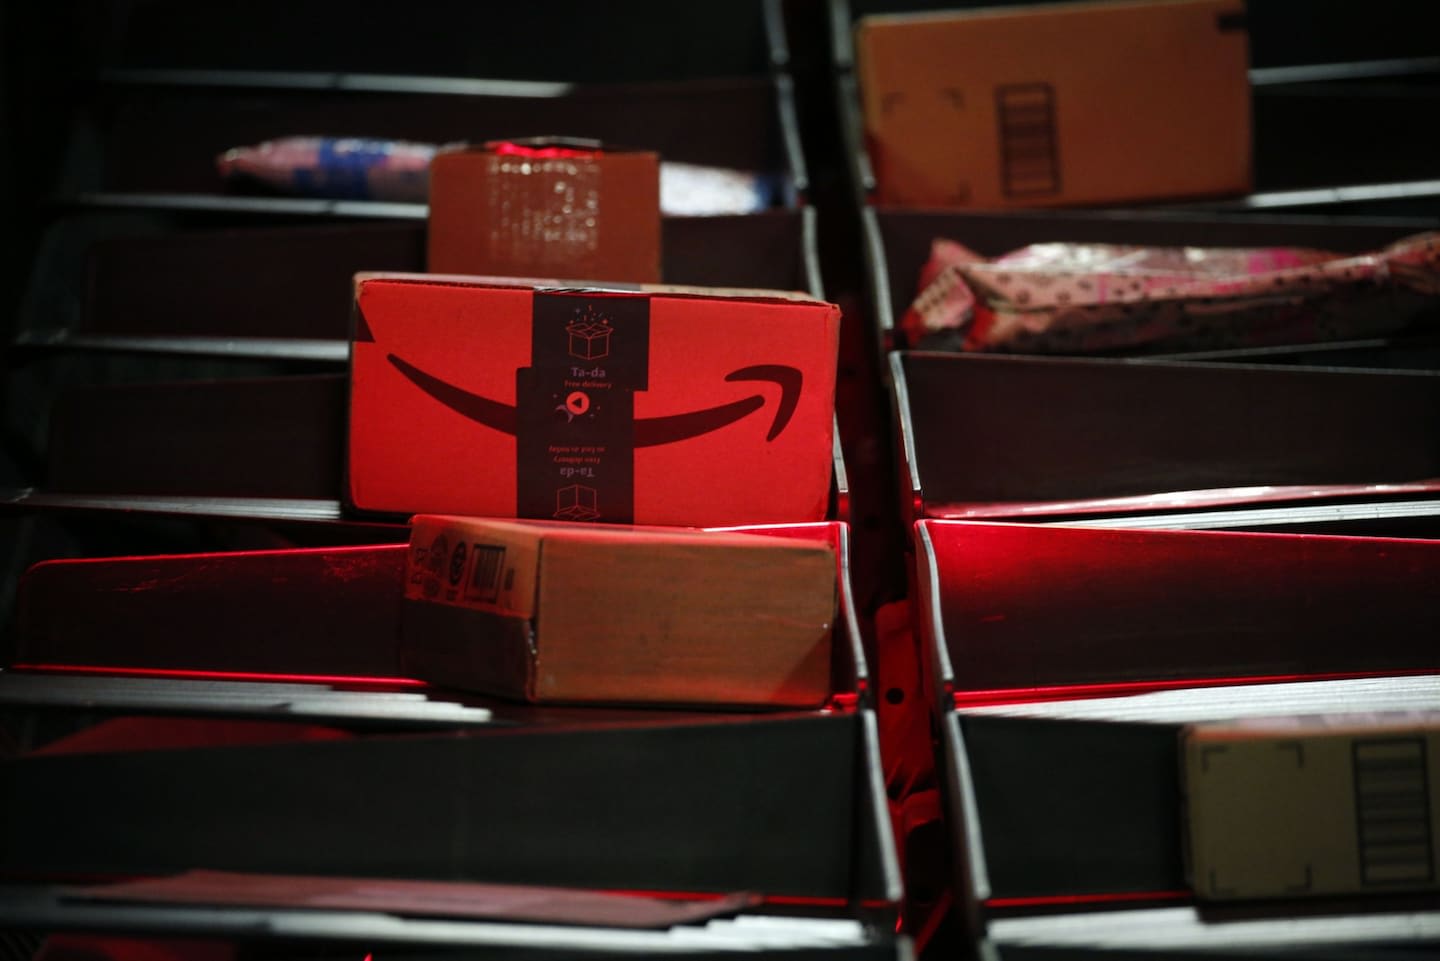 Burning laptops and flooded homes: Courts hold Amazon liable for faulty products